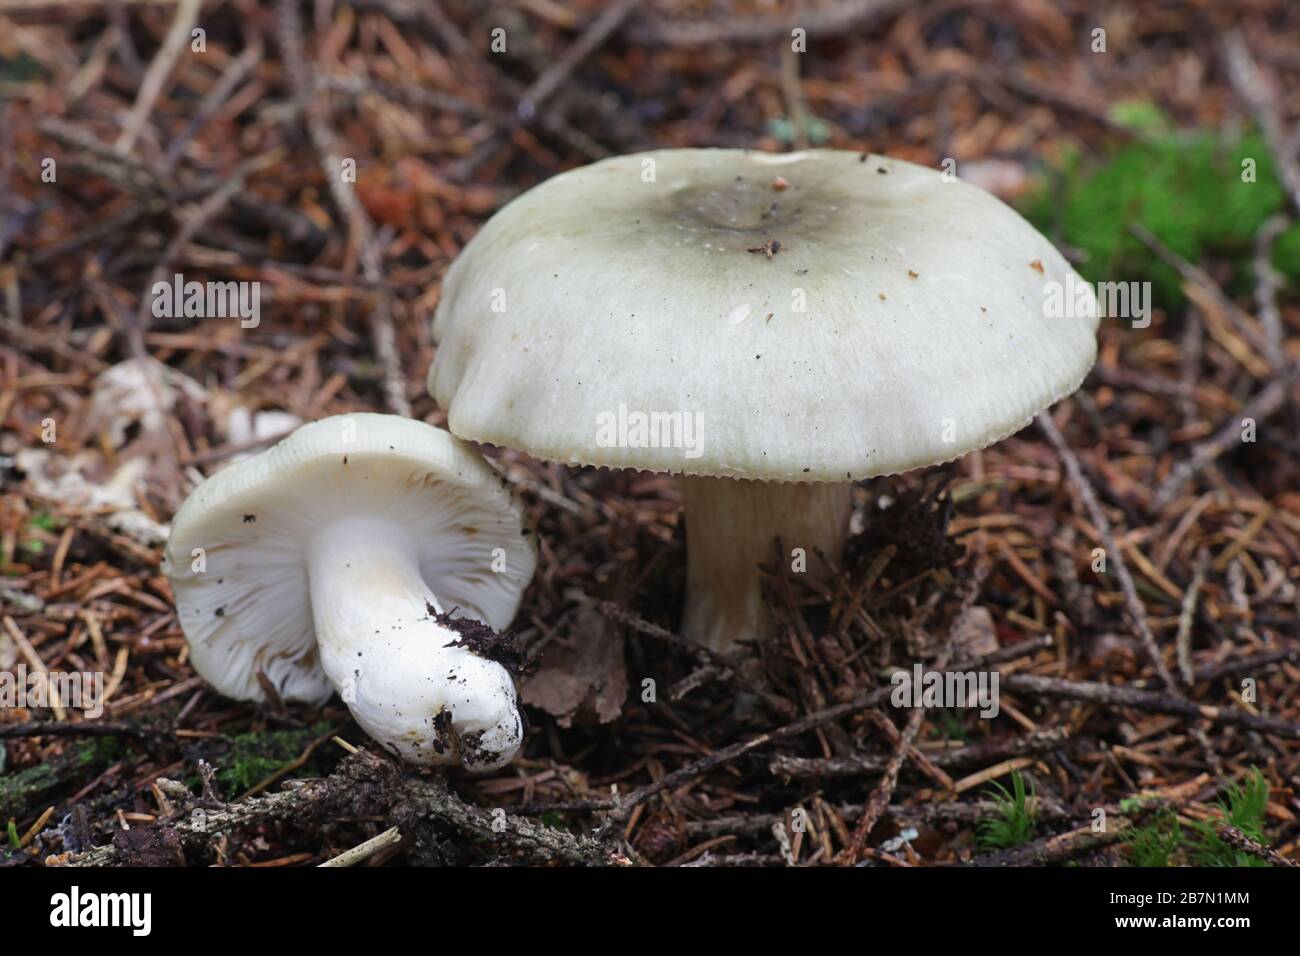 Russula aeruginea, known as the grass-green Russula, the tacky green Russula, or the green brittlegill, wild mushroom from Finland Stock Photo